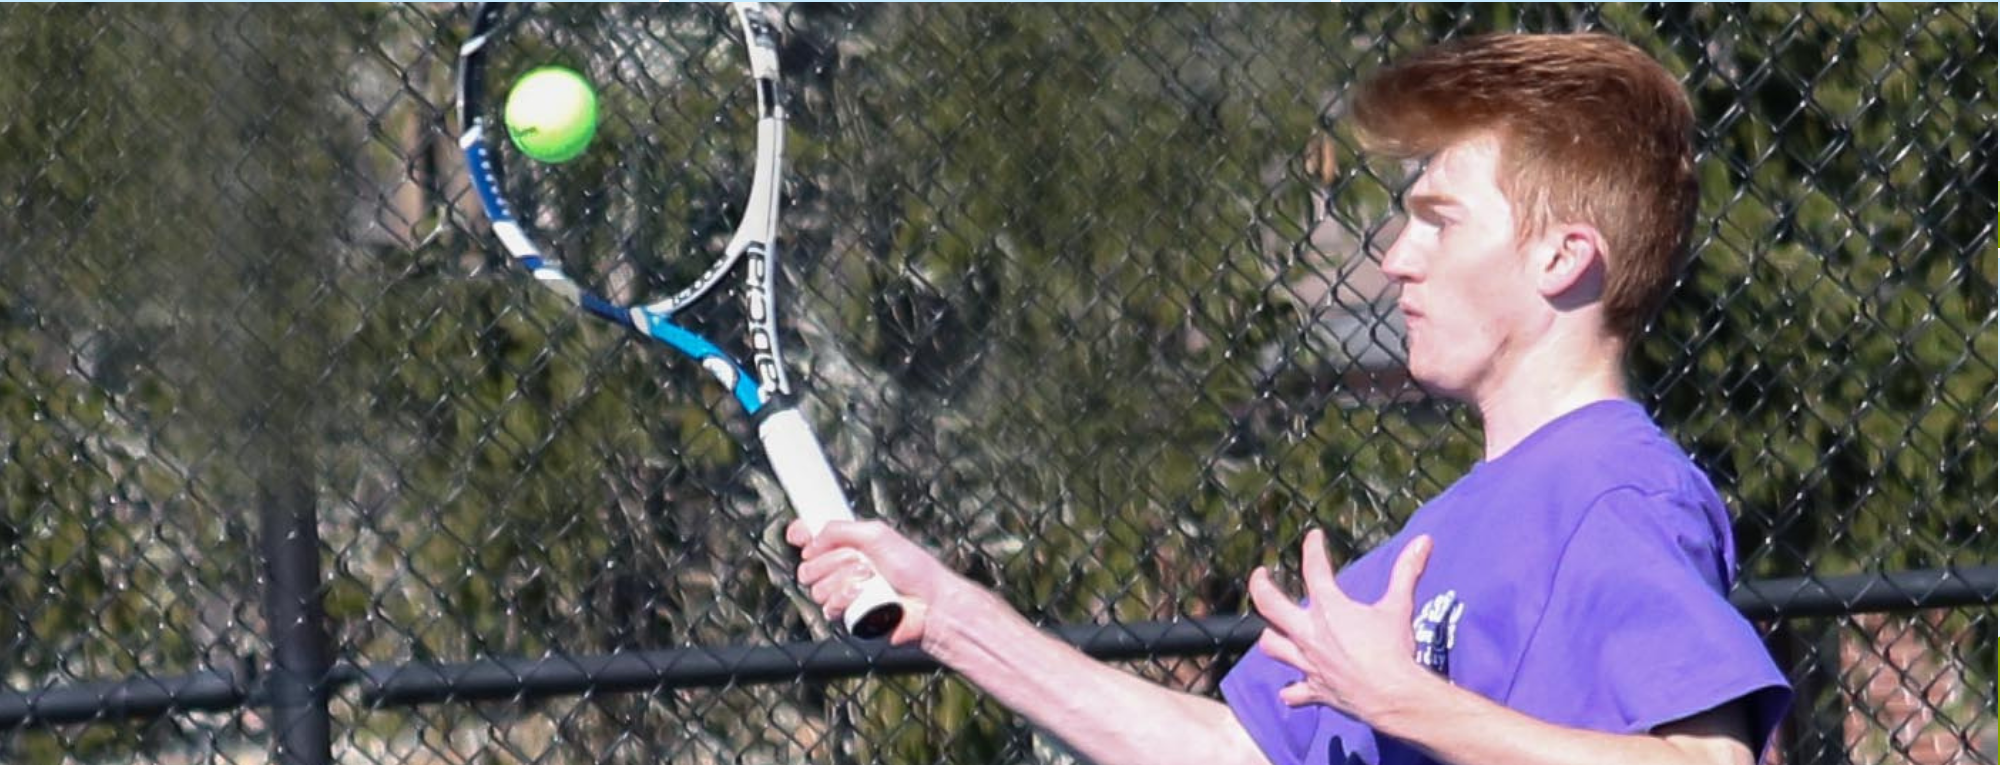 Miles Schafer in action at the McCoy Tennis Complex (Photo courtesy of Don Lander).